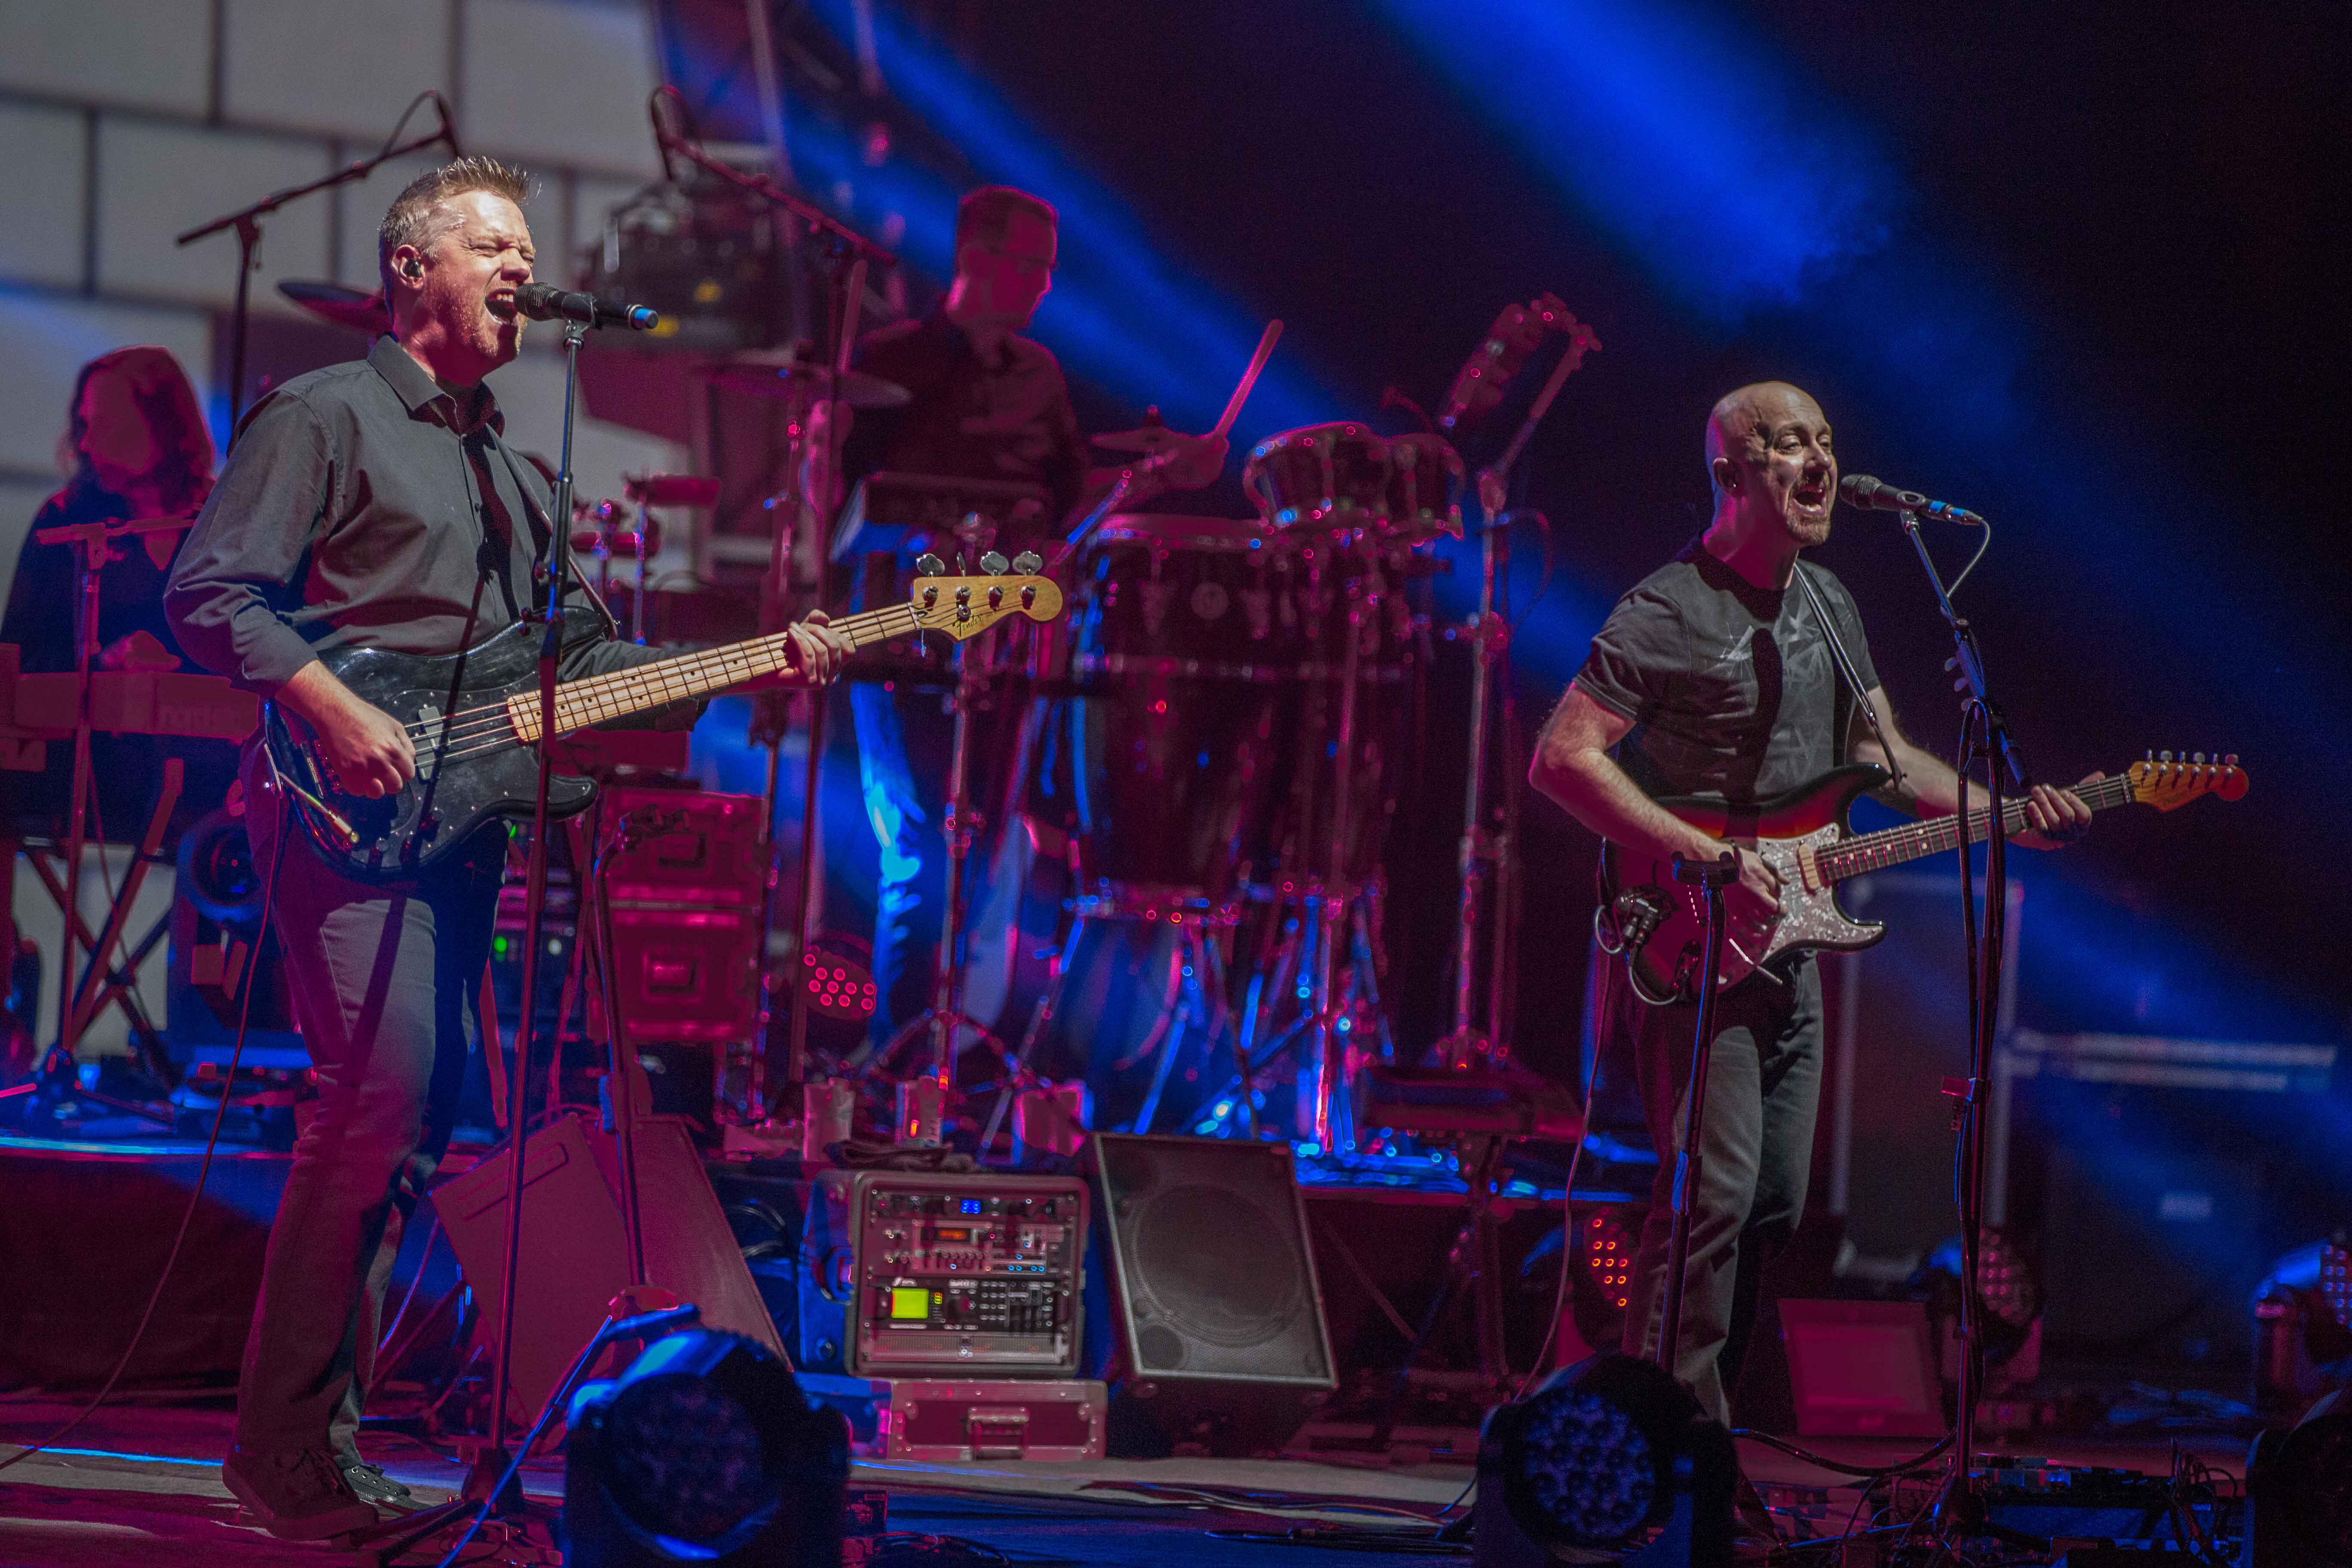 Ian Cattell and Damian Darlington of Brit Floyd in Toronto 2019